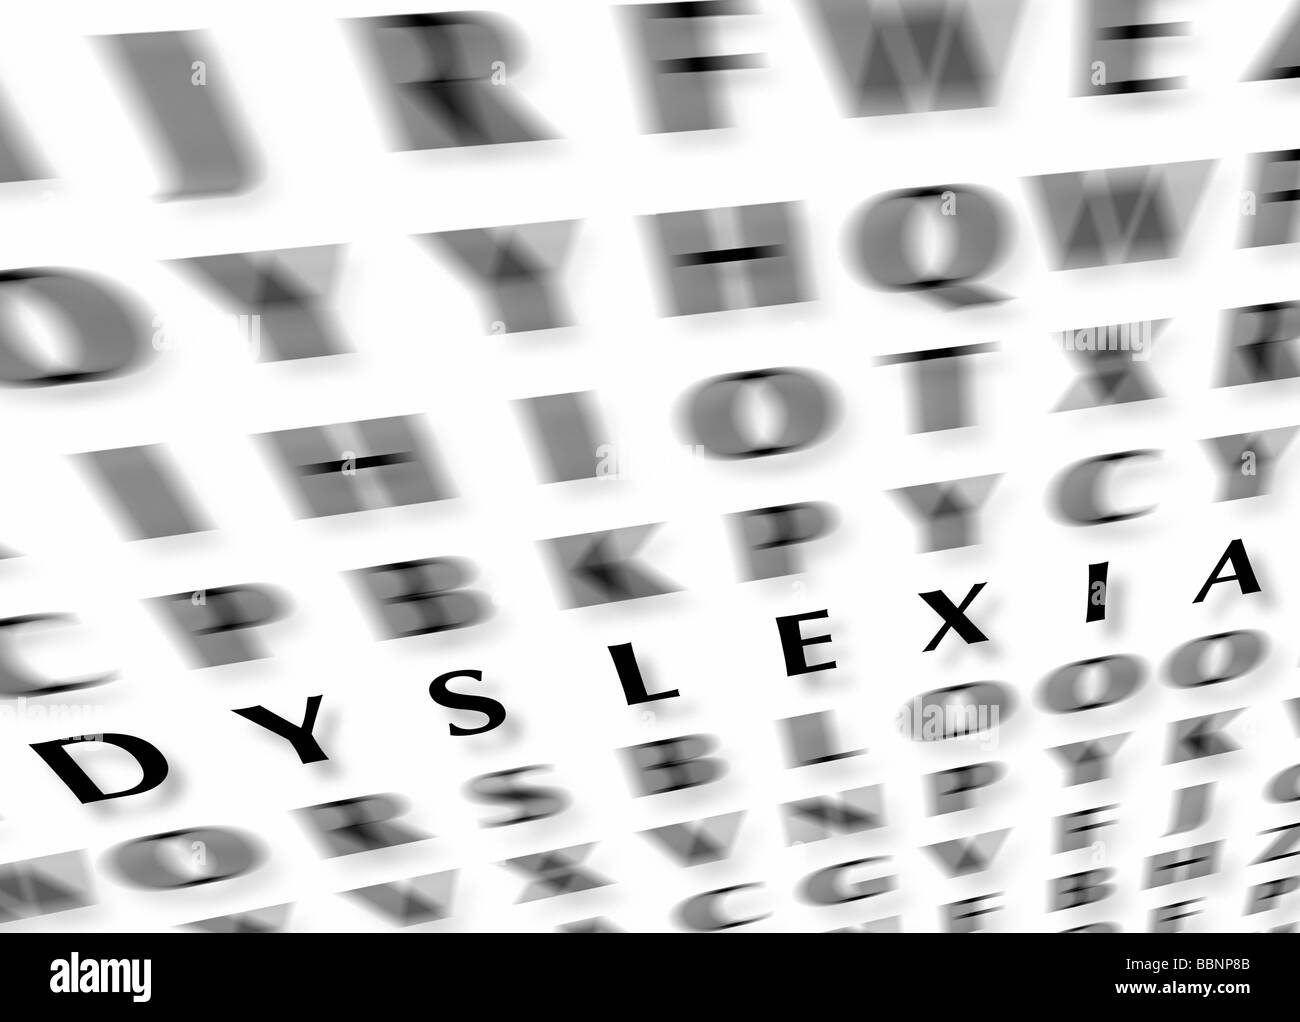 DYSLEXIA CONCEPT The word Dyslexia with random blurred letters on white background. Illustration Stock Photo